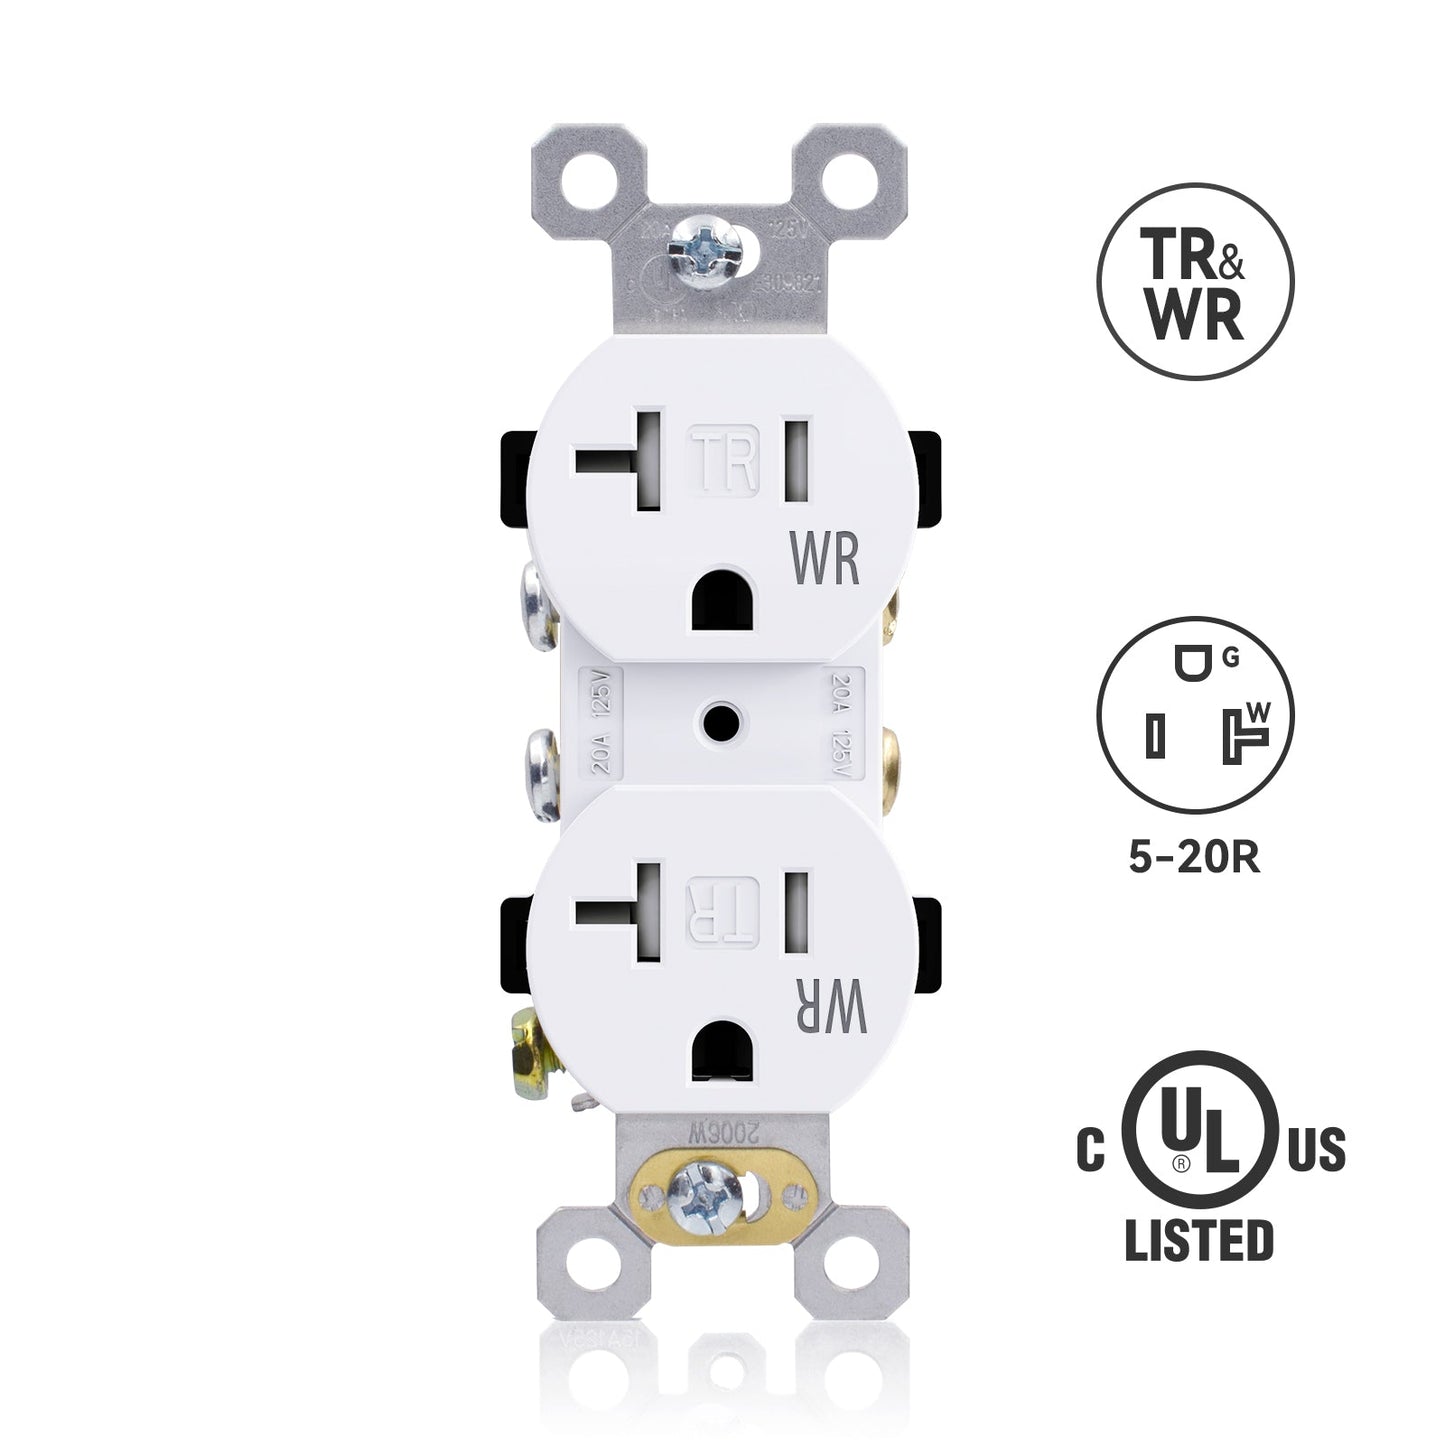 ELEGRP Duplex Outlets 2 Pole 3 Wire Grounding 20A 125V TR & WR Black Receptacle for Residential Use